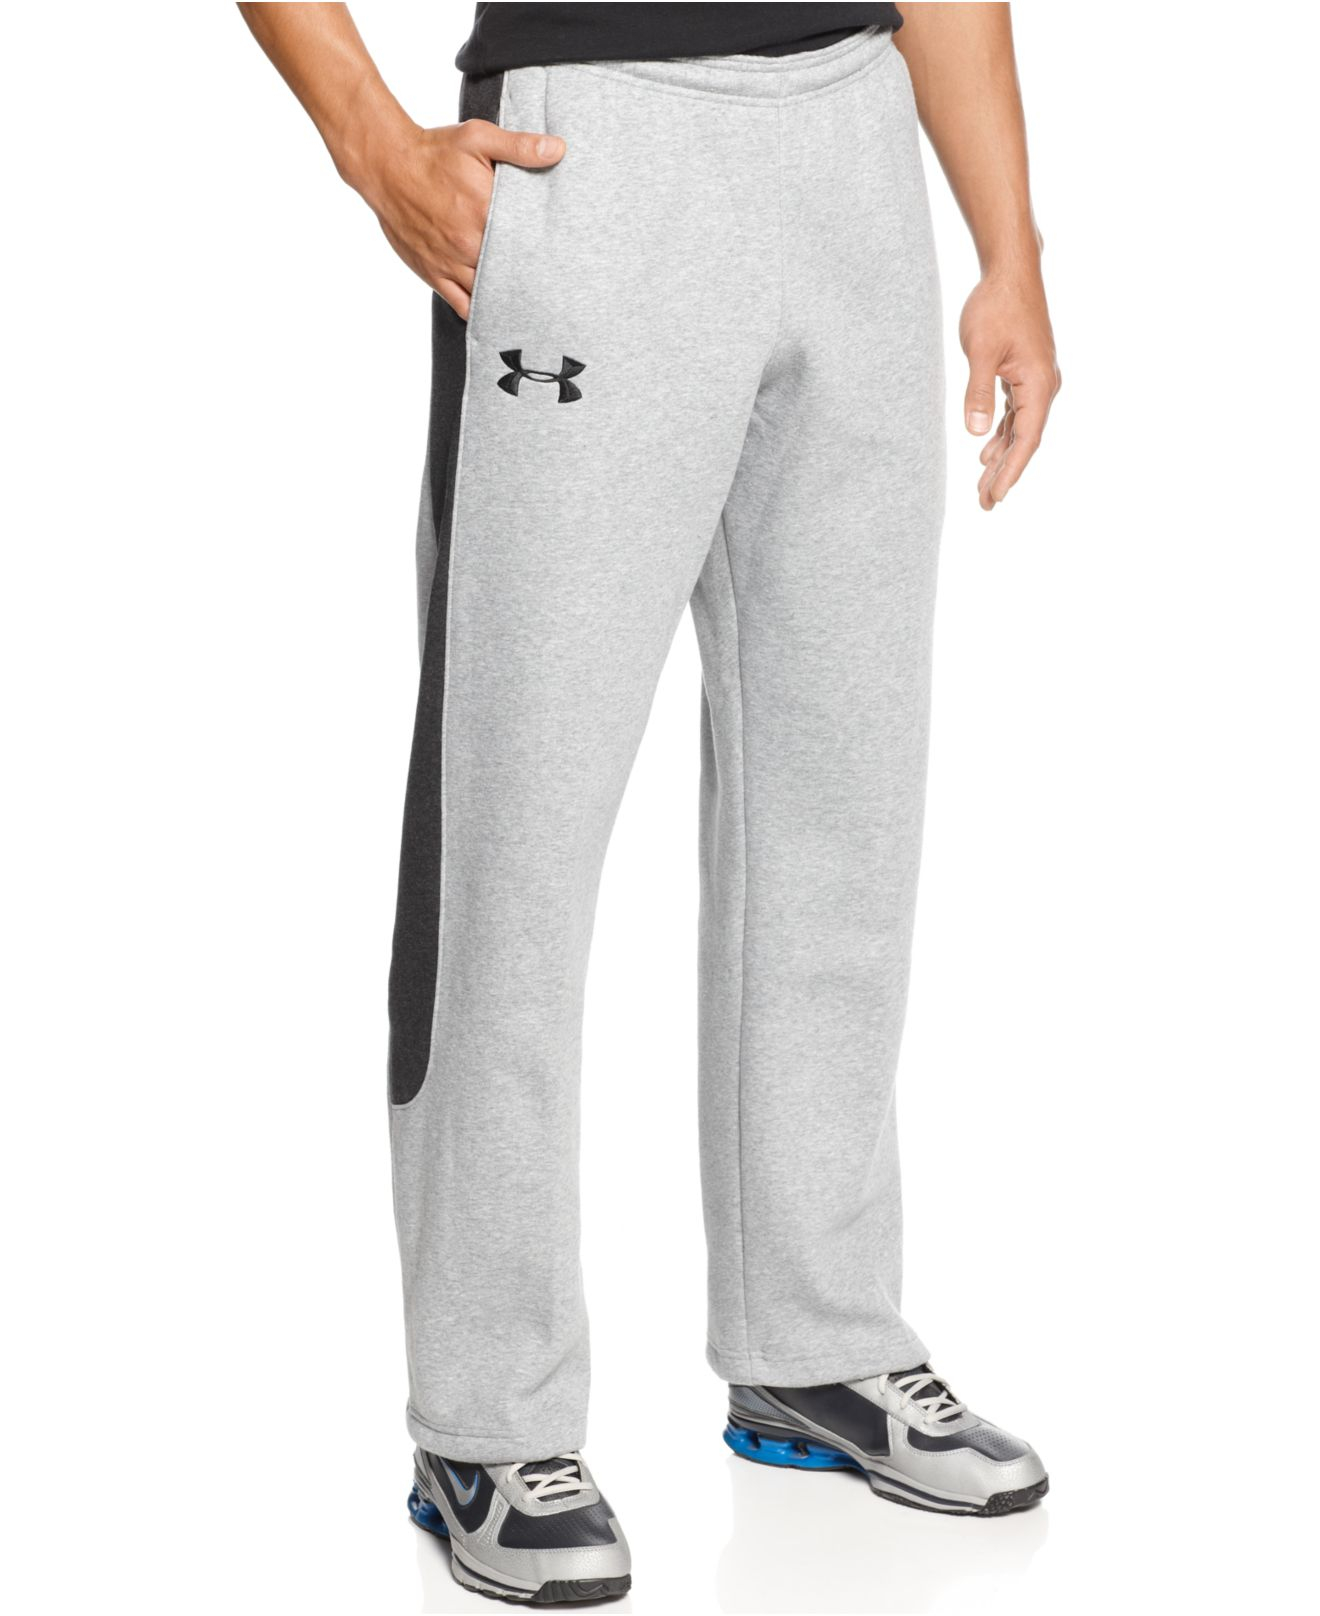 Lyst - Under Armour Water-Repellant Storm Pants in Gray for Men